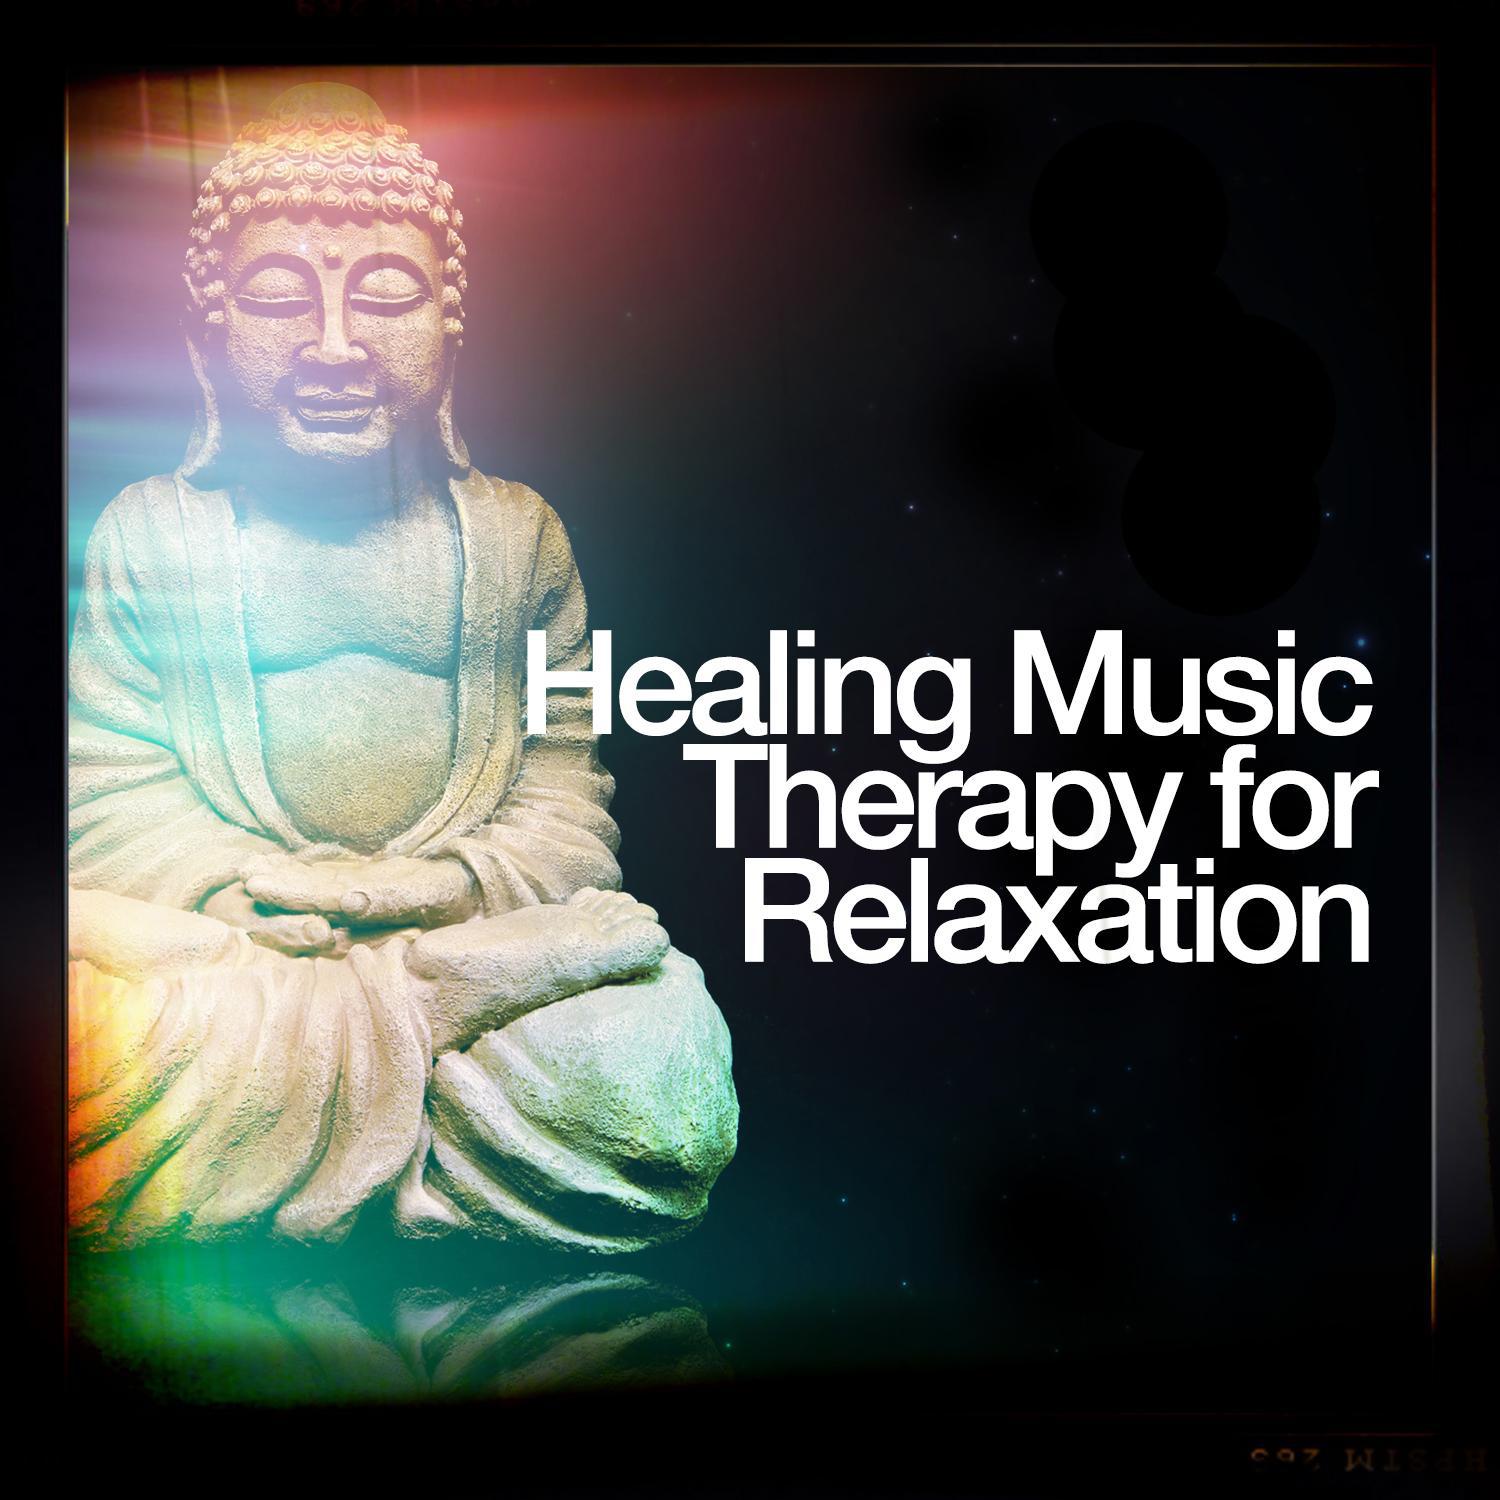 Healing Music Therapy for Relaxation